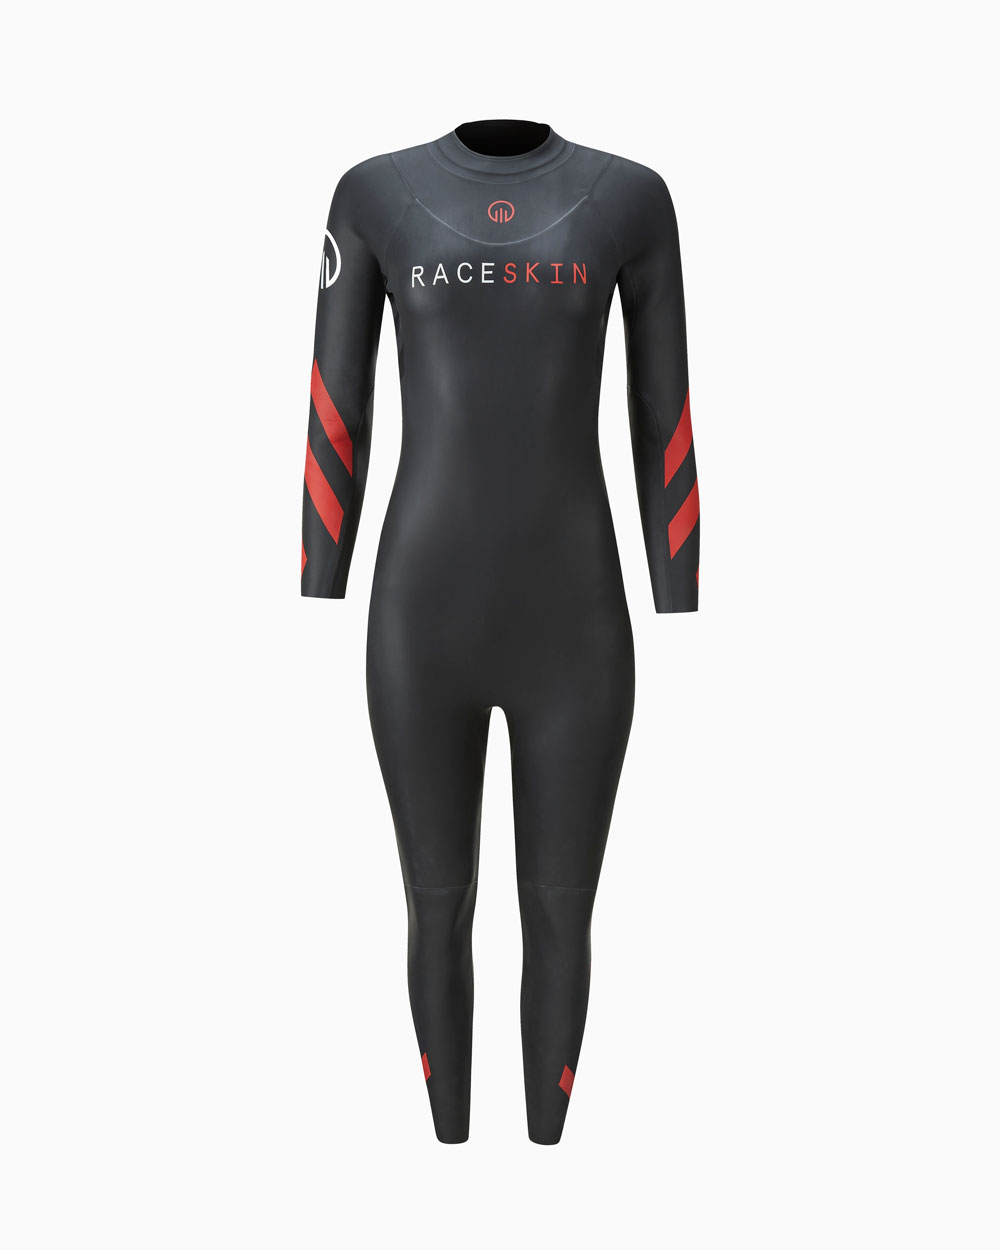 rs-o1-womens-wetsuit